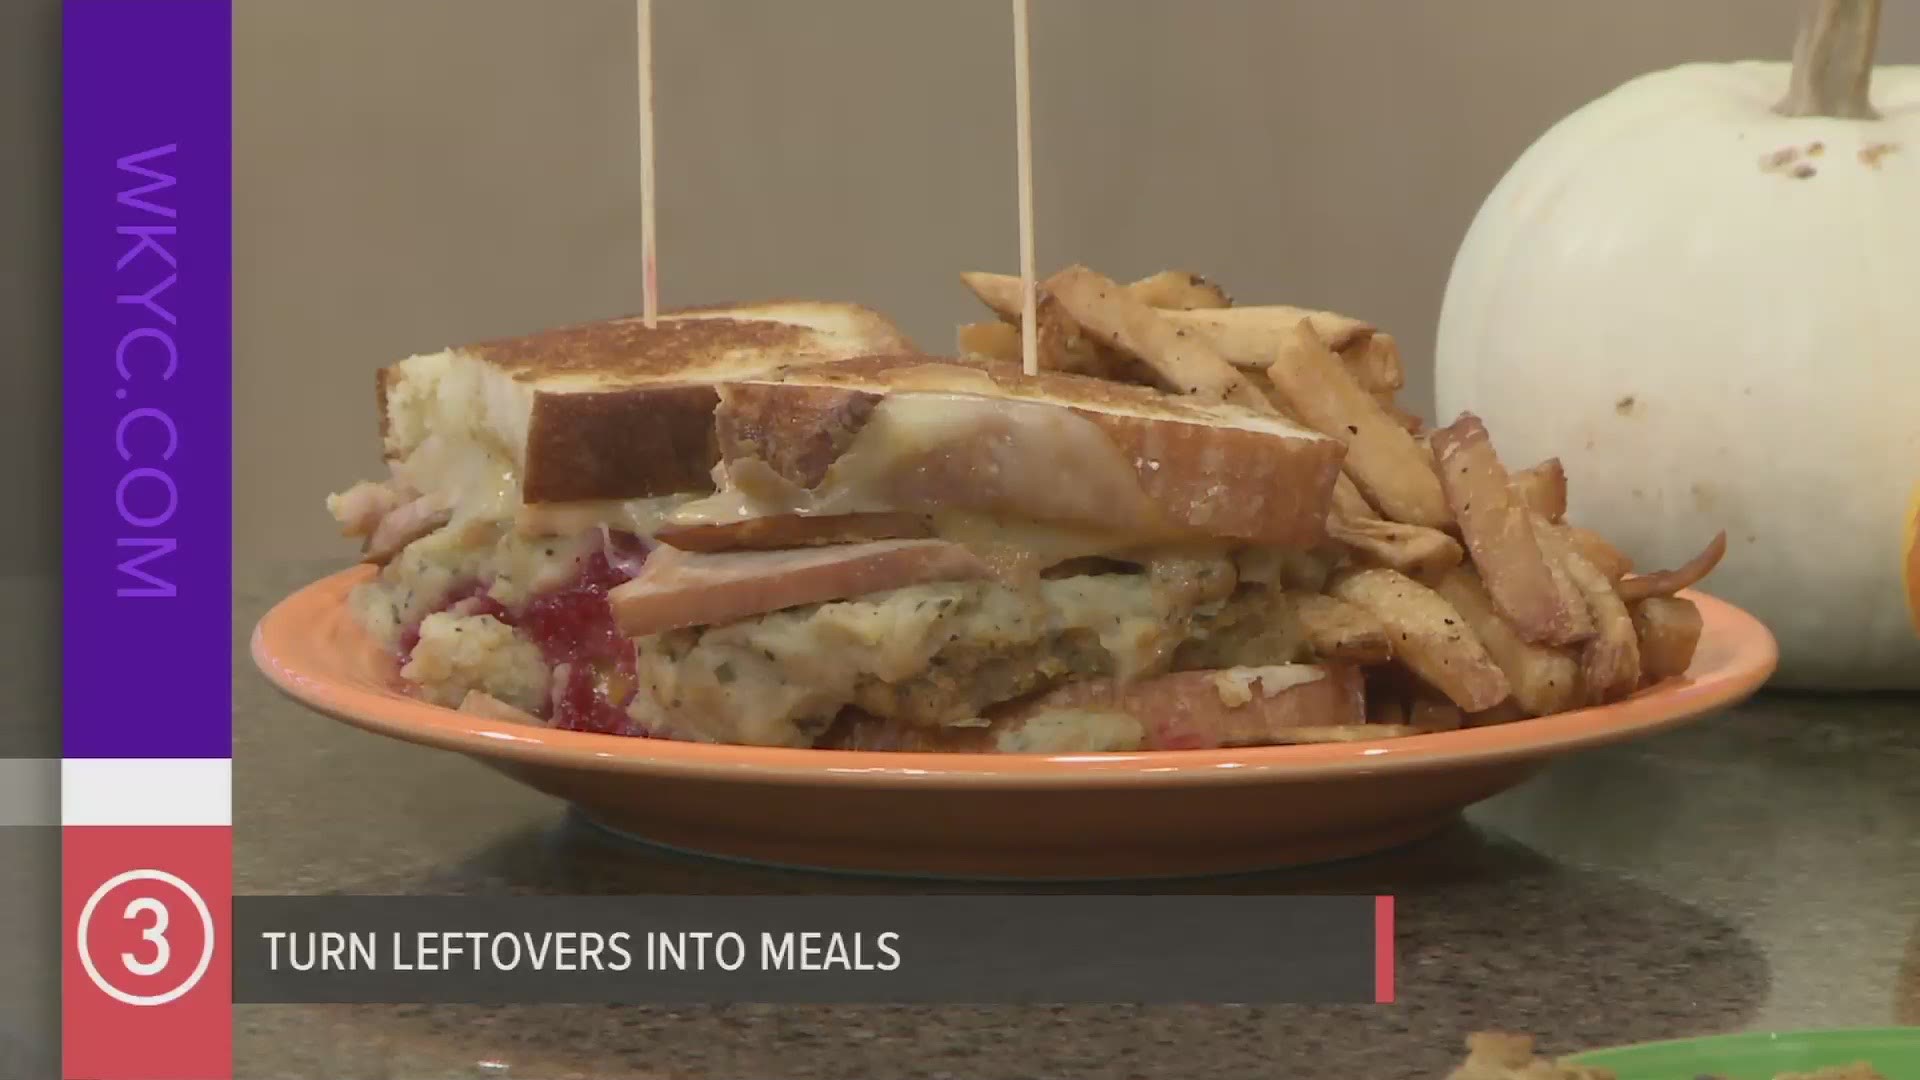 Looking for a creative way to reinvent your leftover turkey from Thanksgiving dinner? Matt Fish, owner of Melt Bar & Grilled, has a must-try turkey sandwich recipe.